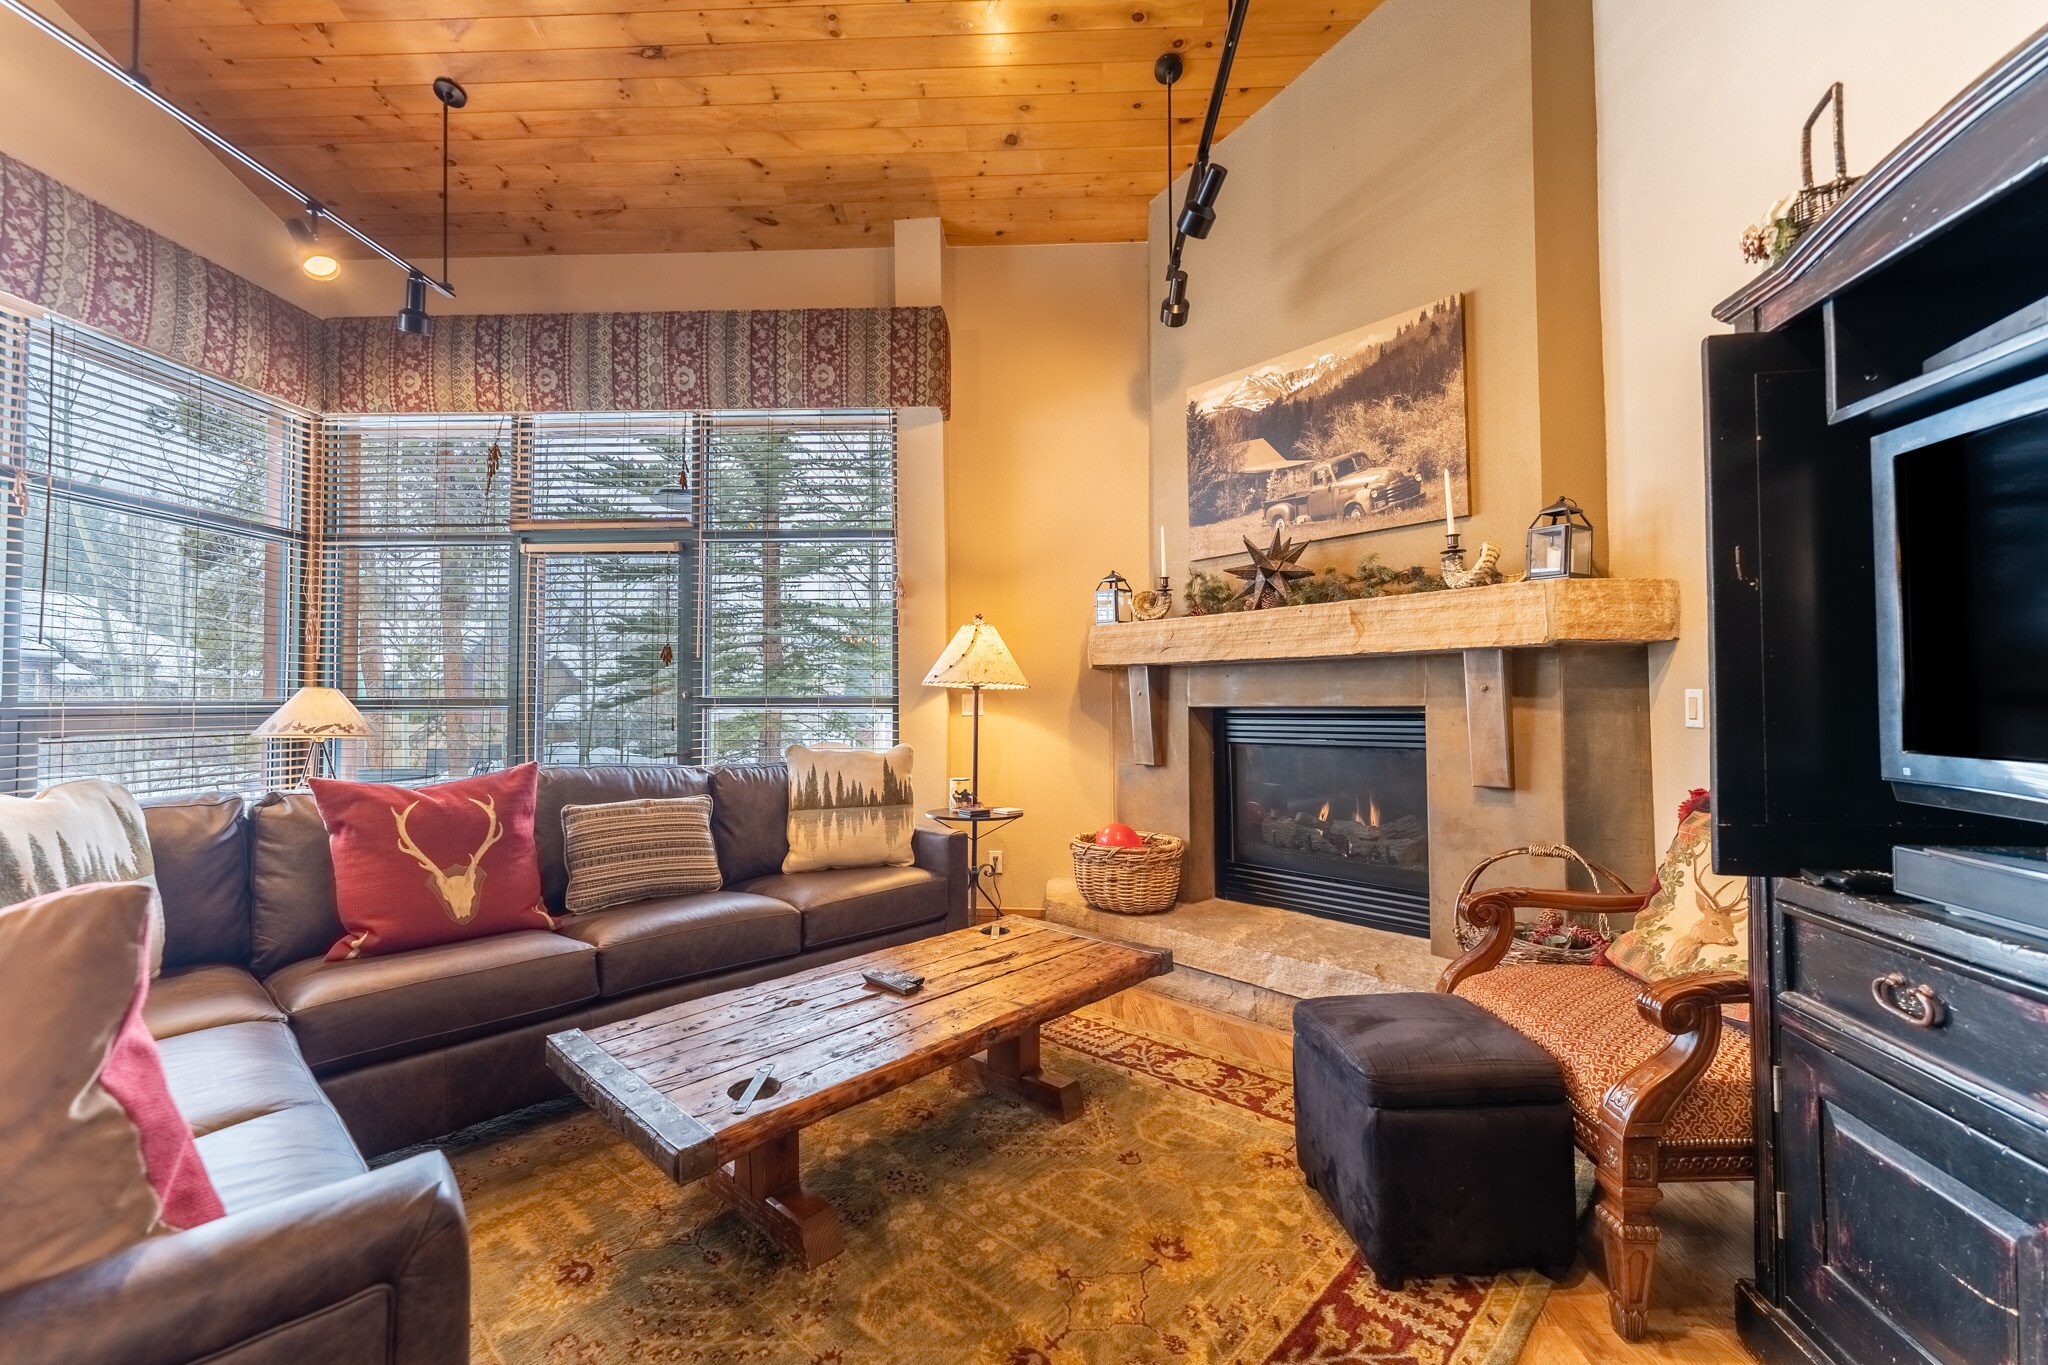 Living area offering cozy furnishings, a gas fireplace and TV.